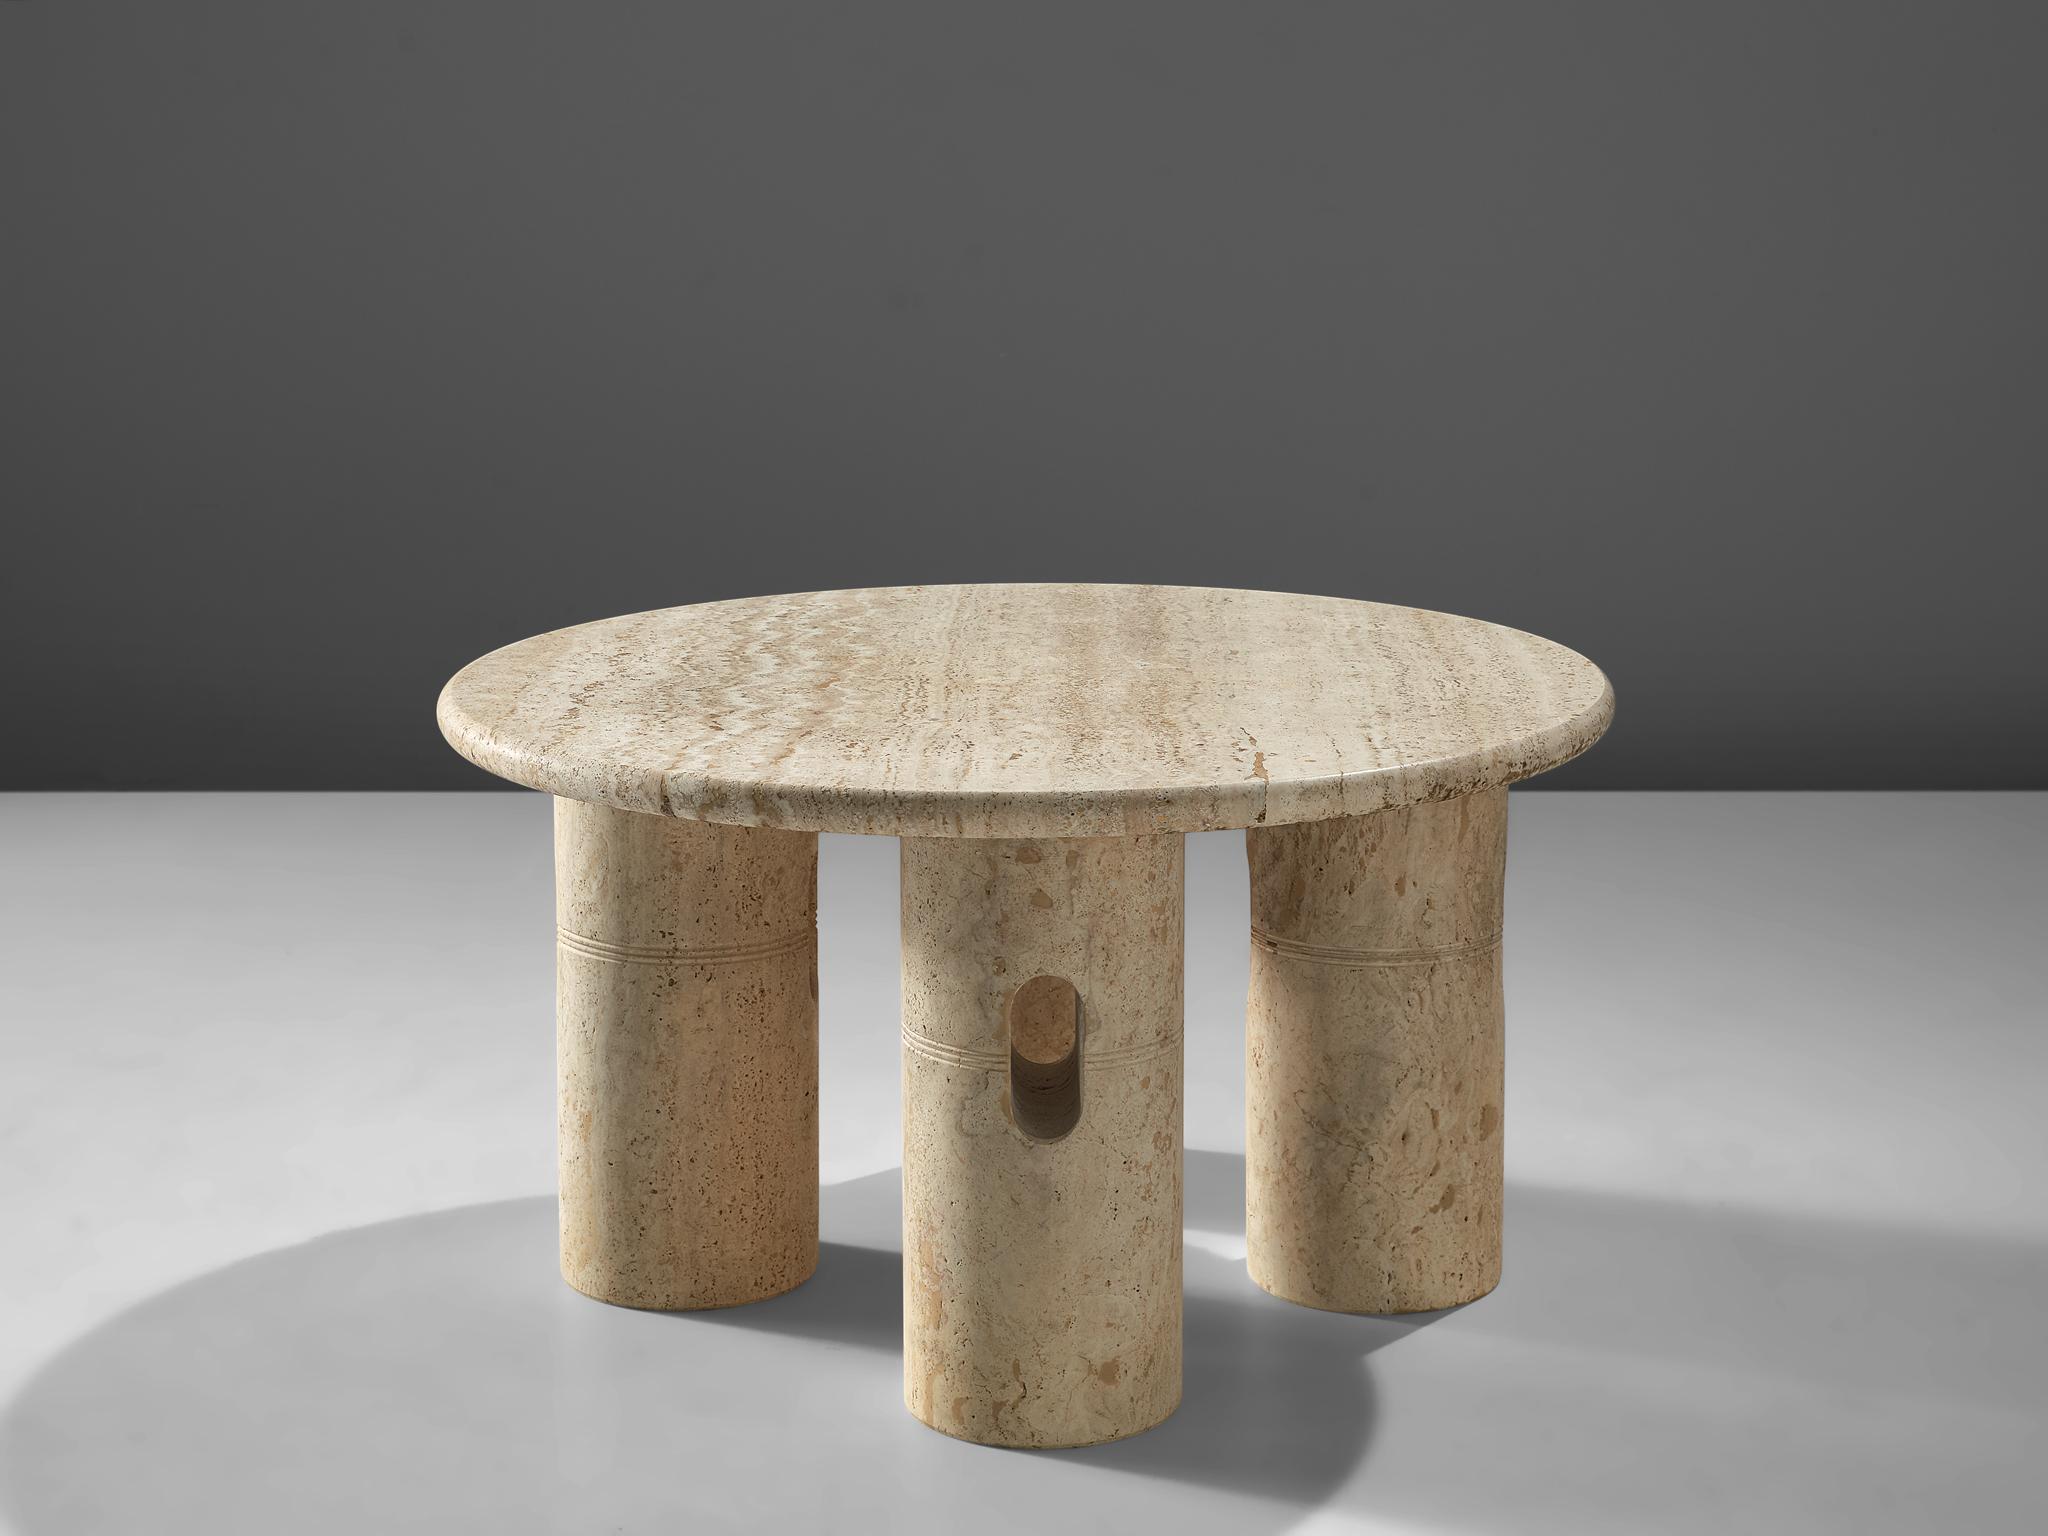 Cocktail table, travertine, Italy, 1970s.

This architectural coffee table is a skilful example of postmodern design. The table rests on the four column-like legs, creating a classical, monumental piece. These tables are archetypical postmodern,